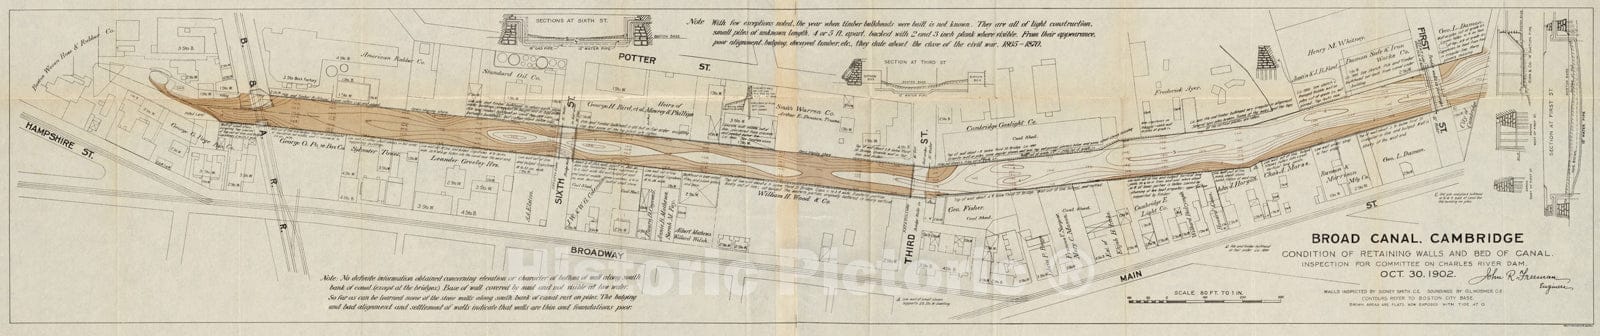 Historical Map, Broad Canal, Cambridge : Condition of retaining Walls and Bed of Canal, Inspection for Committee on Charles River Dam, Oct. 30, 1902, Vintage Wall Art